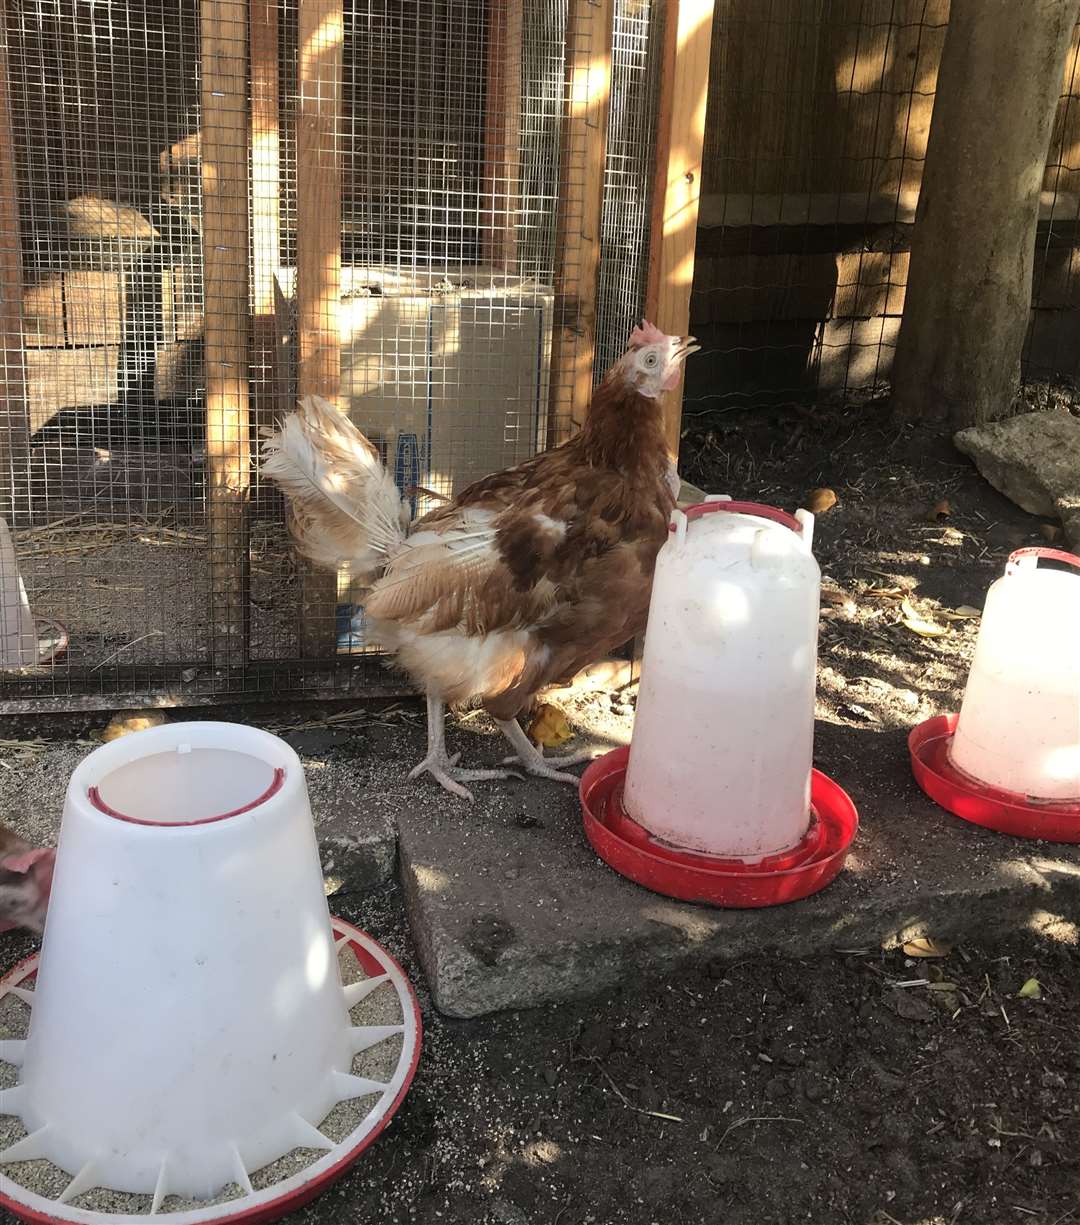 Chickens are great company